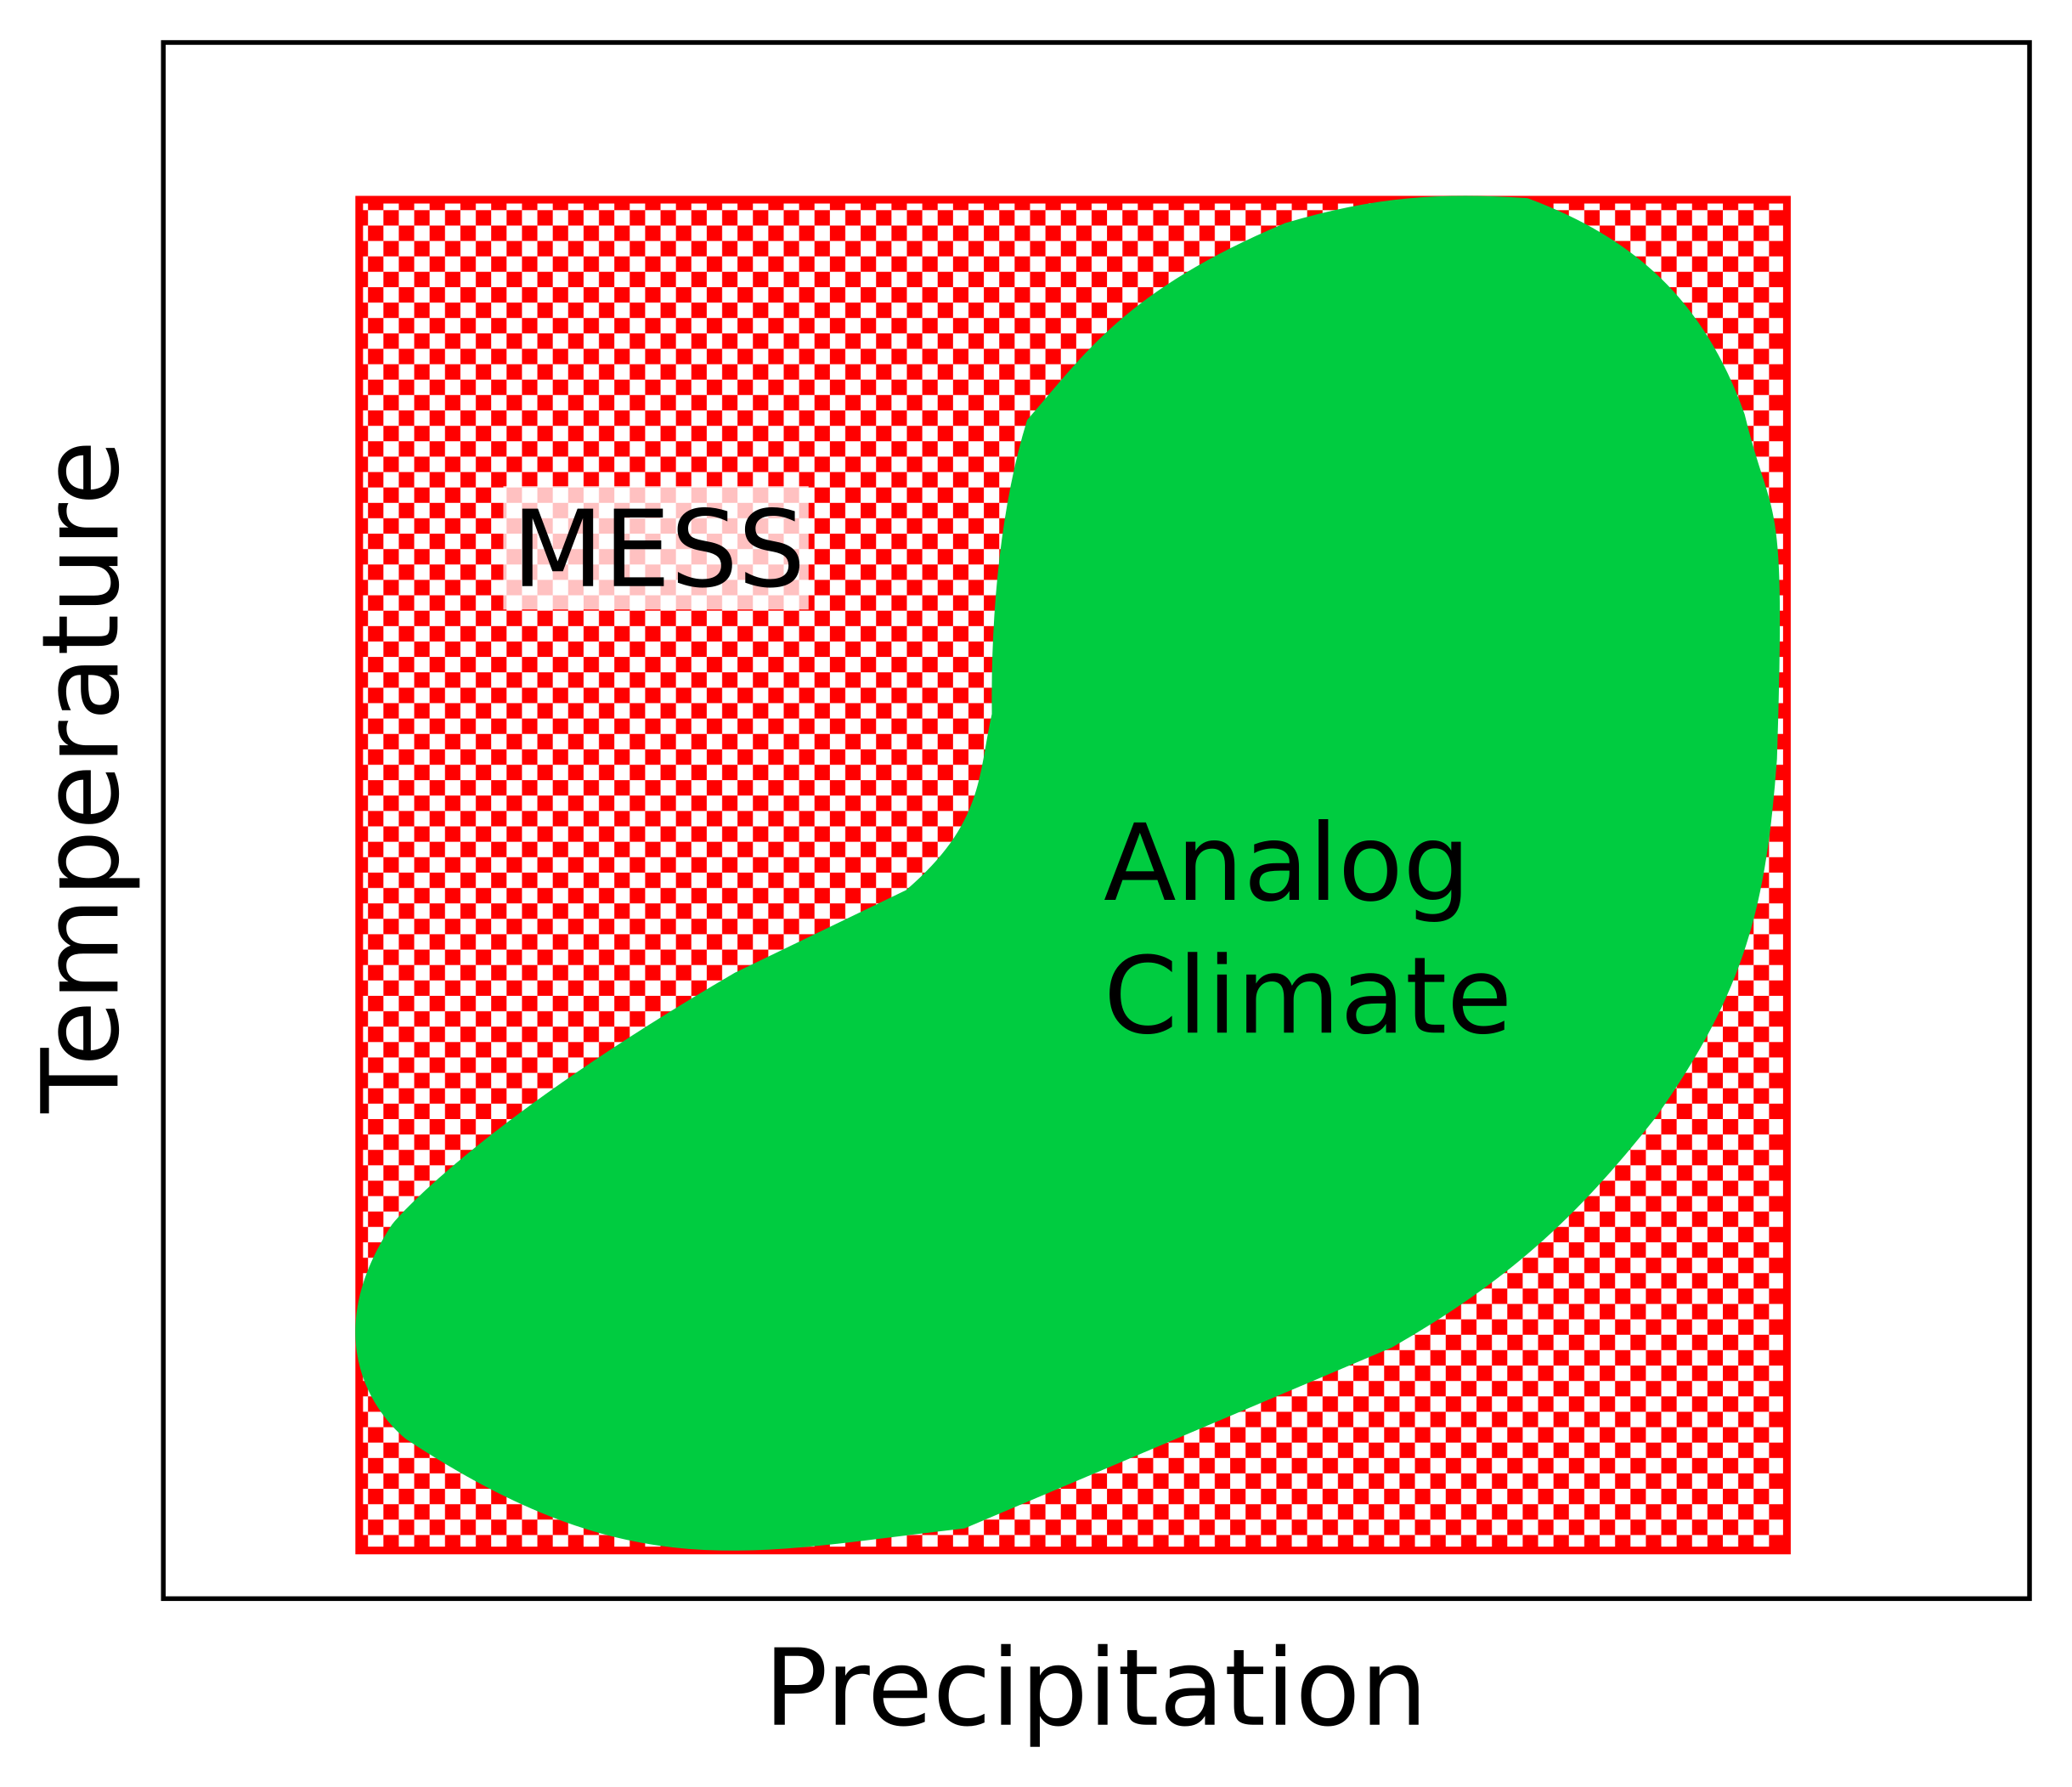 Visualization of MESS analysis. The green area indicates the reference climate conditions, and the red square shows the climate space MESS will identify as ‘analog’.